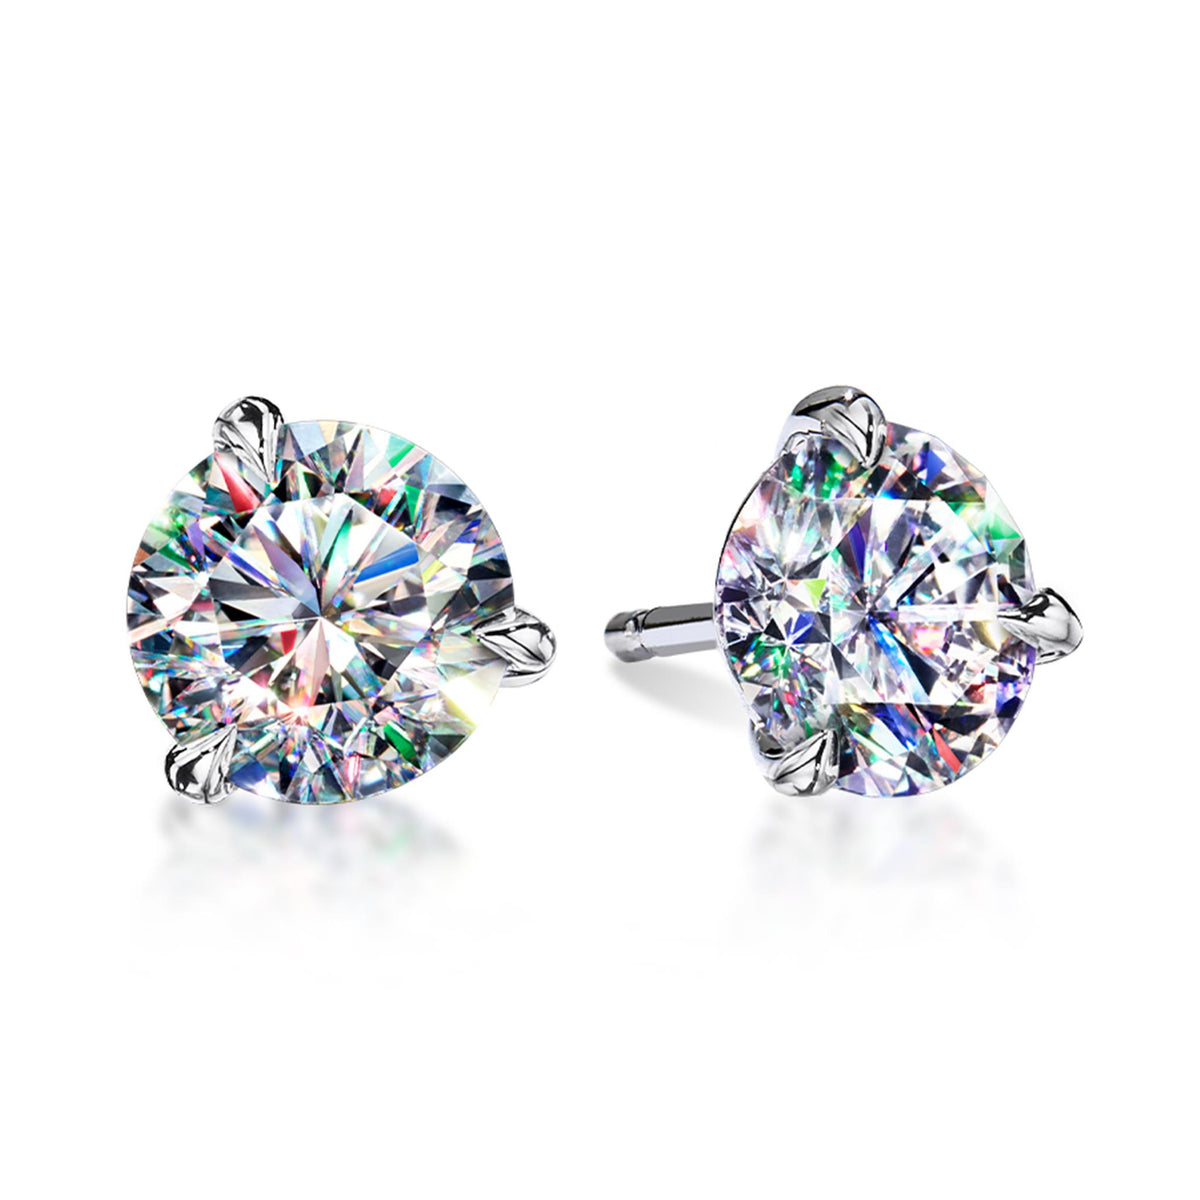 Facets Of Fire 14Kt White Gold Martini Stud Earrings With 1.00cttw Natural Diamonds